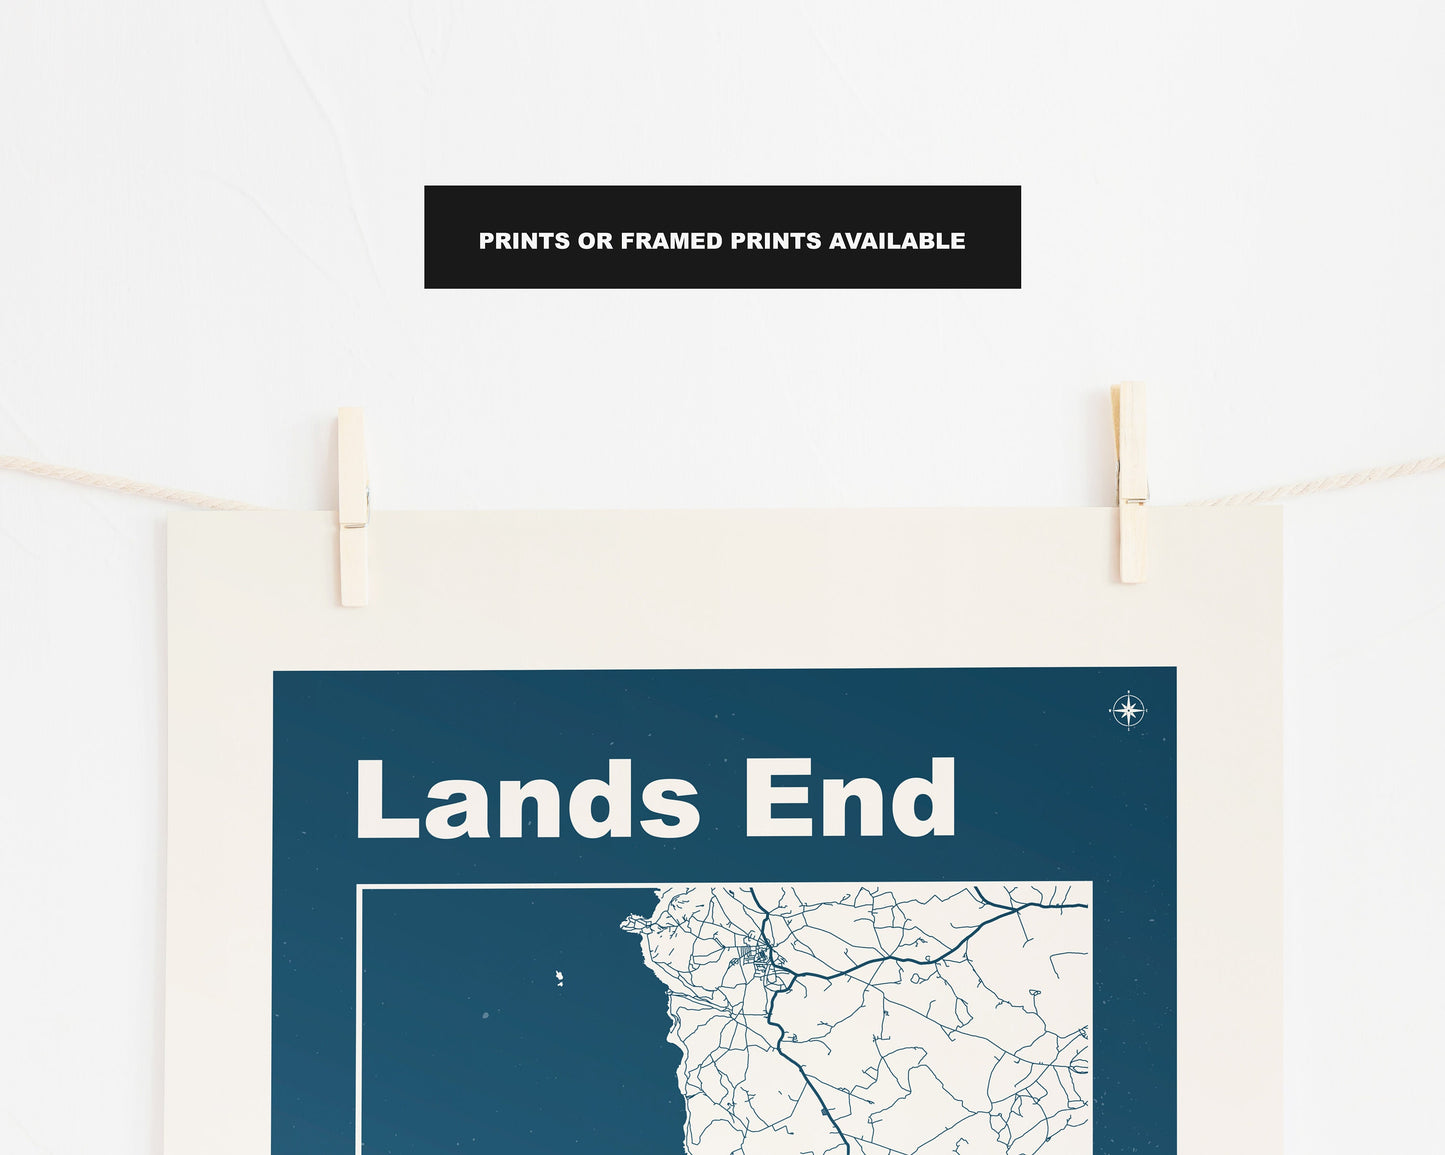 Lands End Print - Map Print - Mid Century Modern  - Retro - Vintage - Contemporary - Lands End Print - Map - Map Poster - Gift - Cornwall